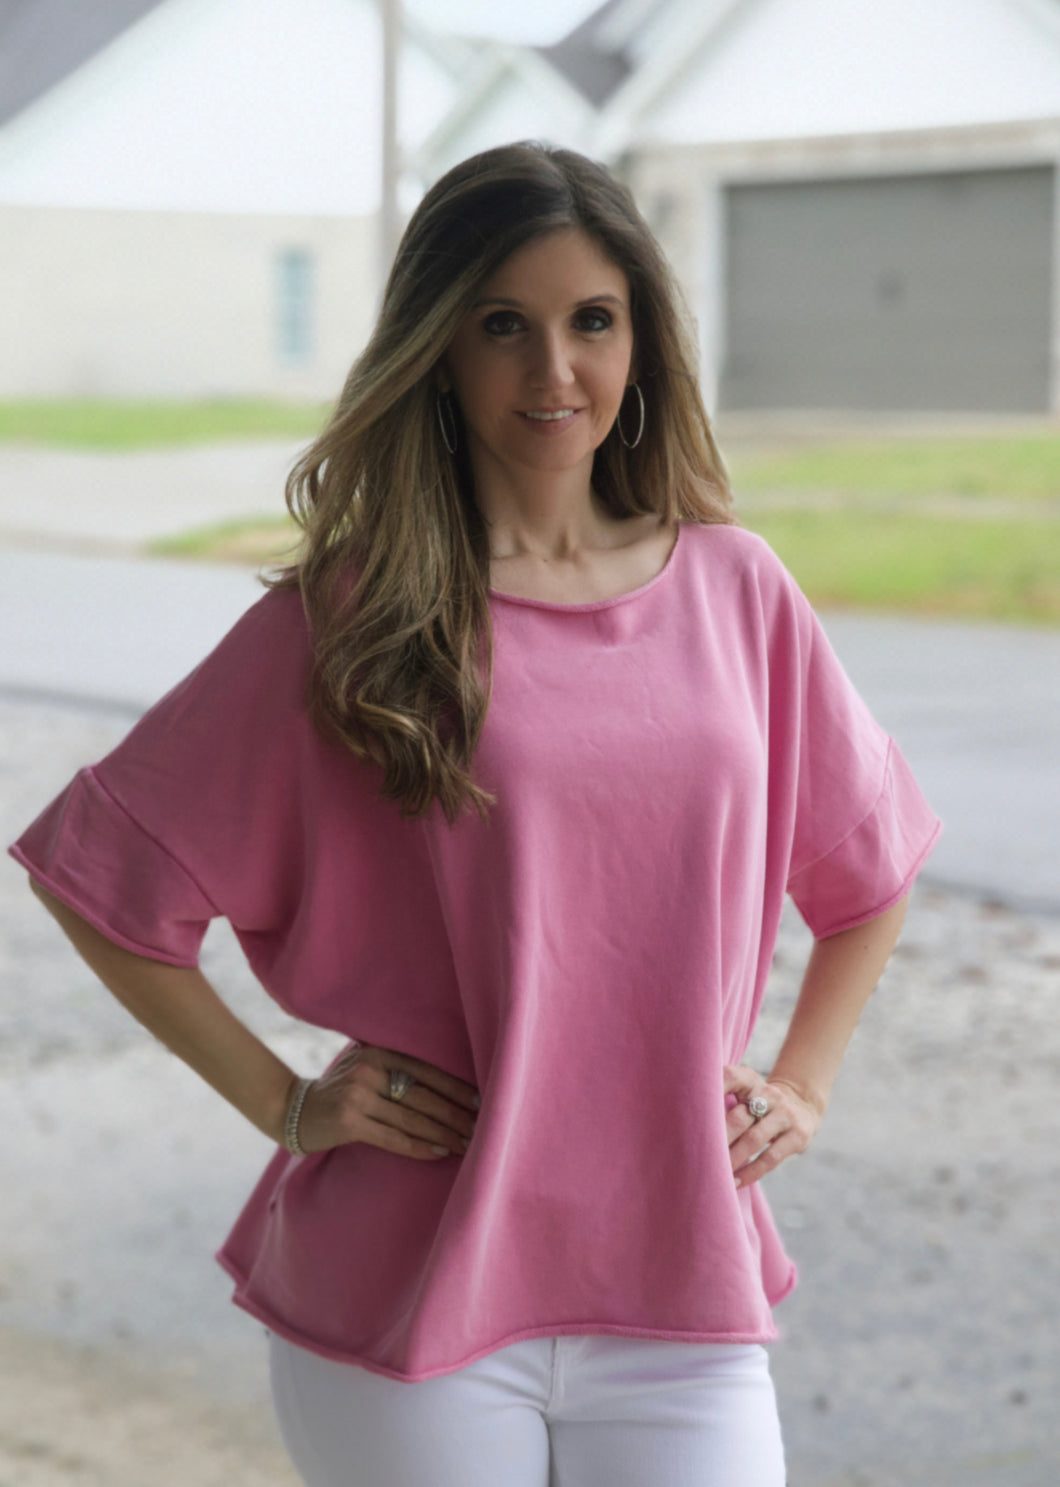 Easel Solid Color Terry Knit Top with Raw Cut Details in Malibu Pink Shirts & Tops Easel   